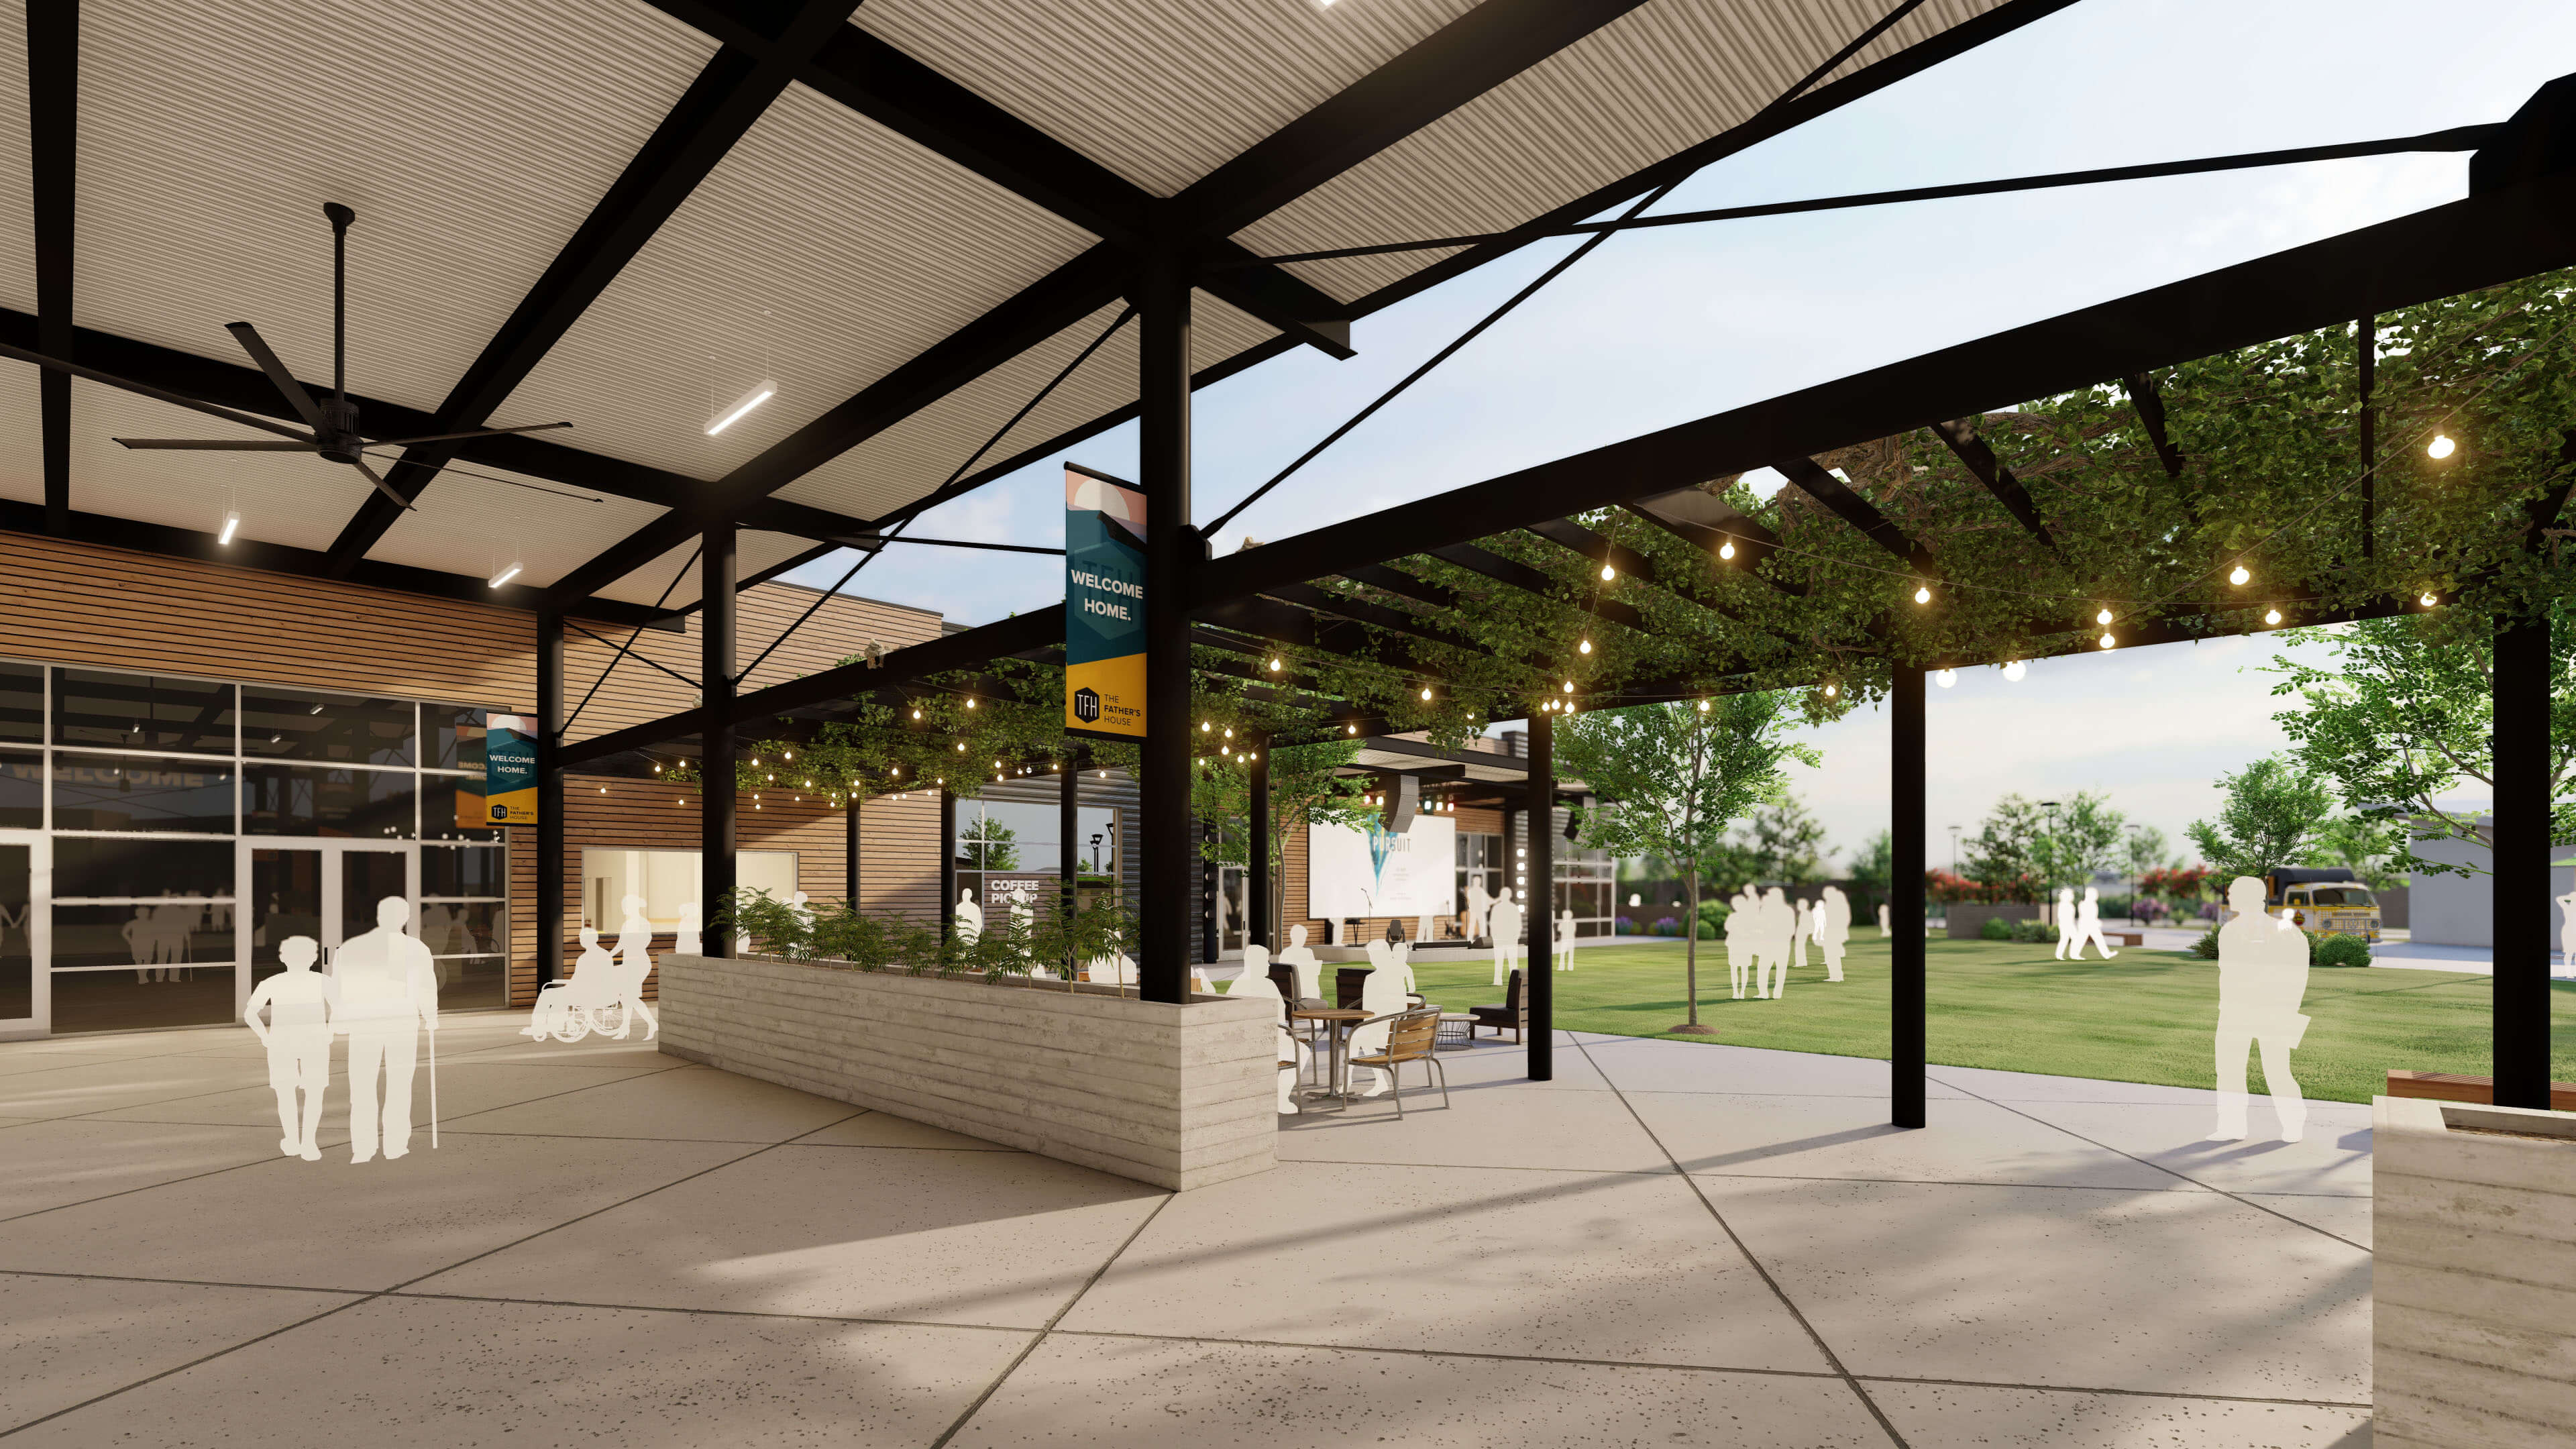 The Father's House - Vacaville Campus - Cafe Seating Exterior Rendering